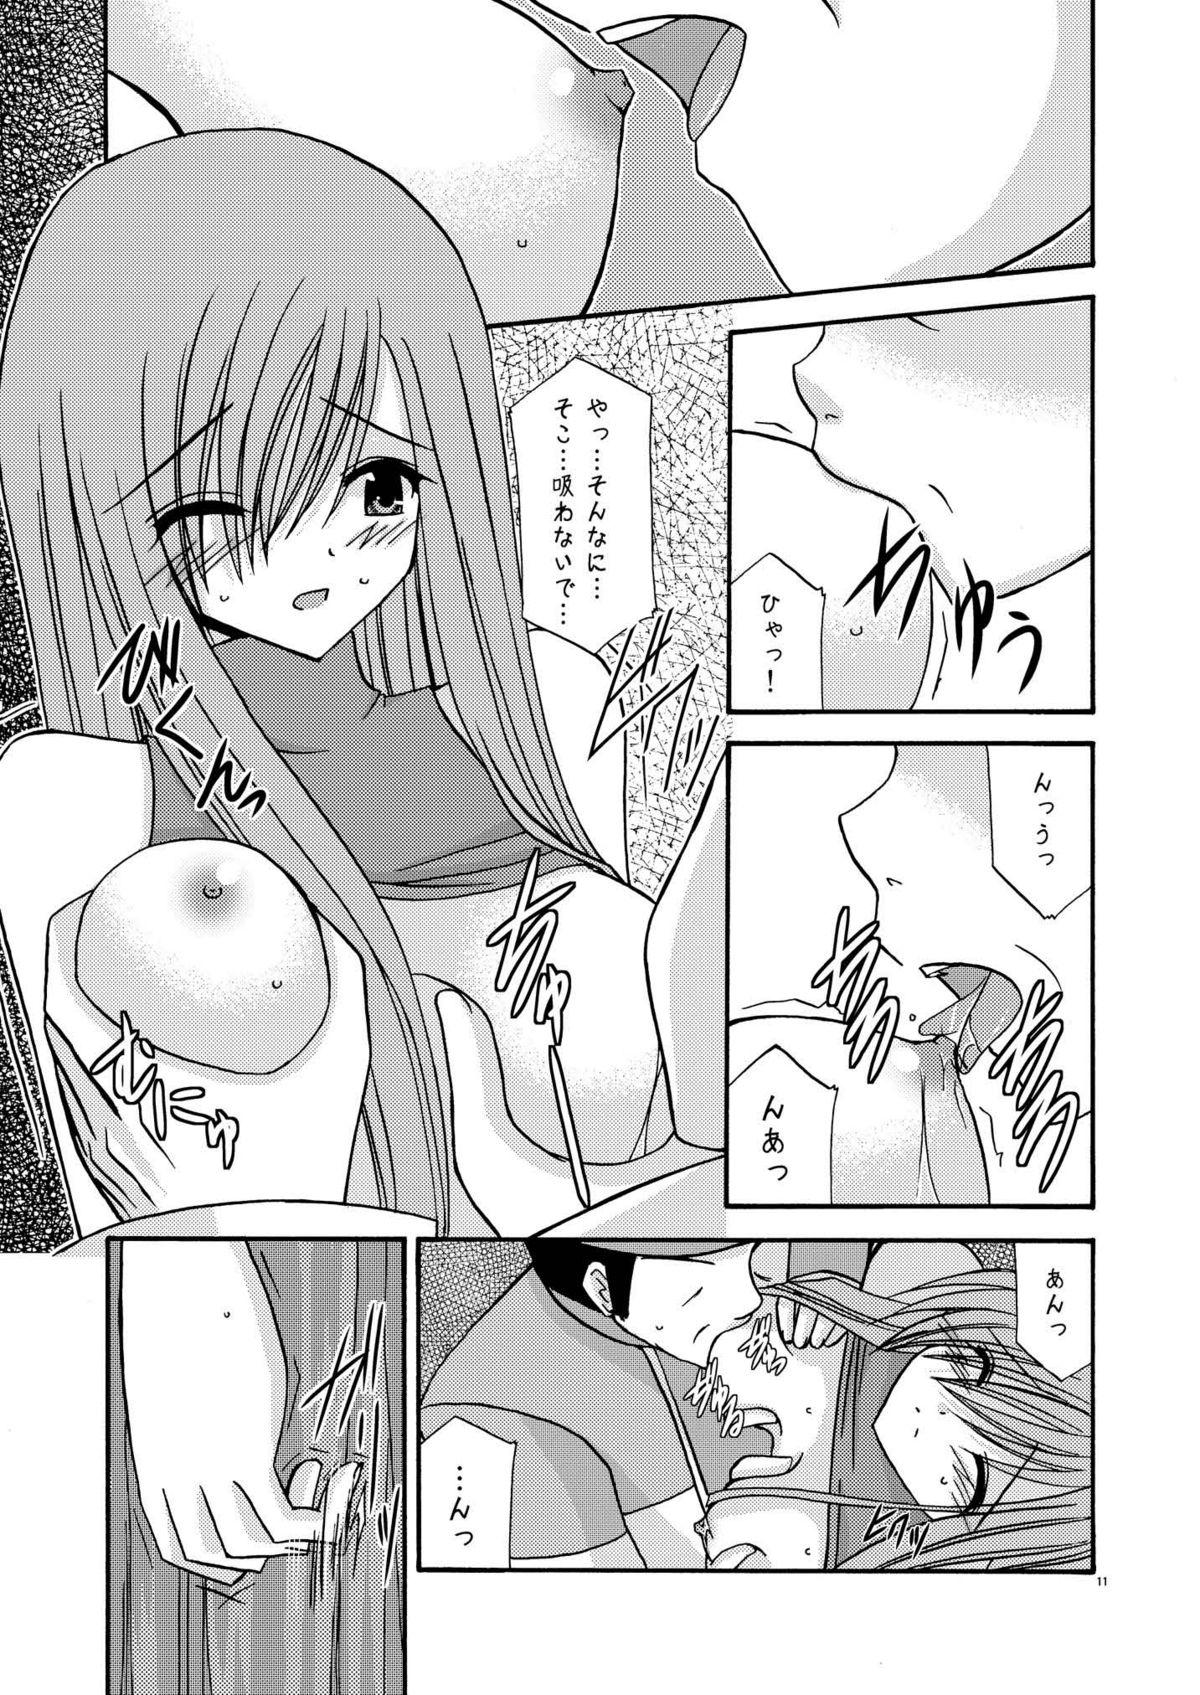 Free Blow Job Tales of Phallus vol.2 - Tales of the abyss Eng Sub - Page 11